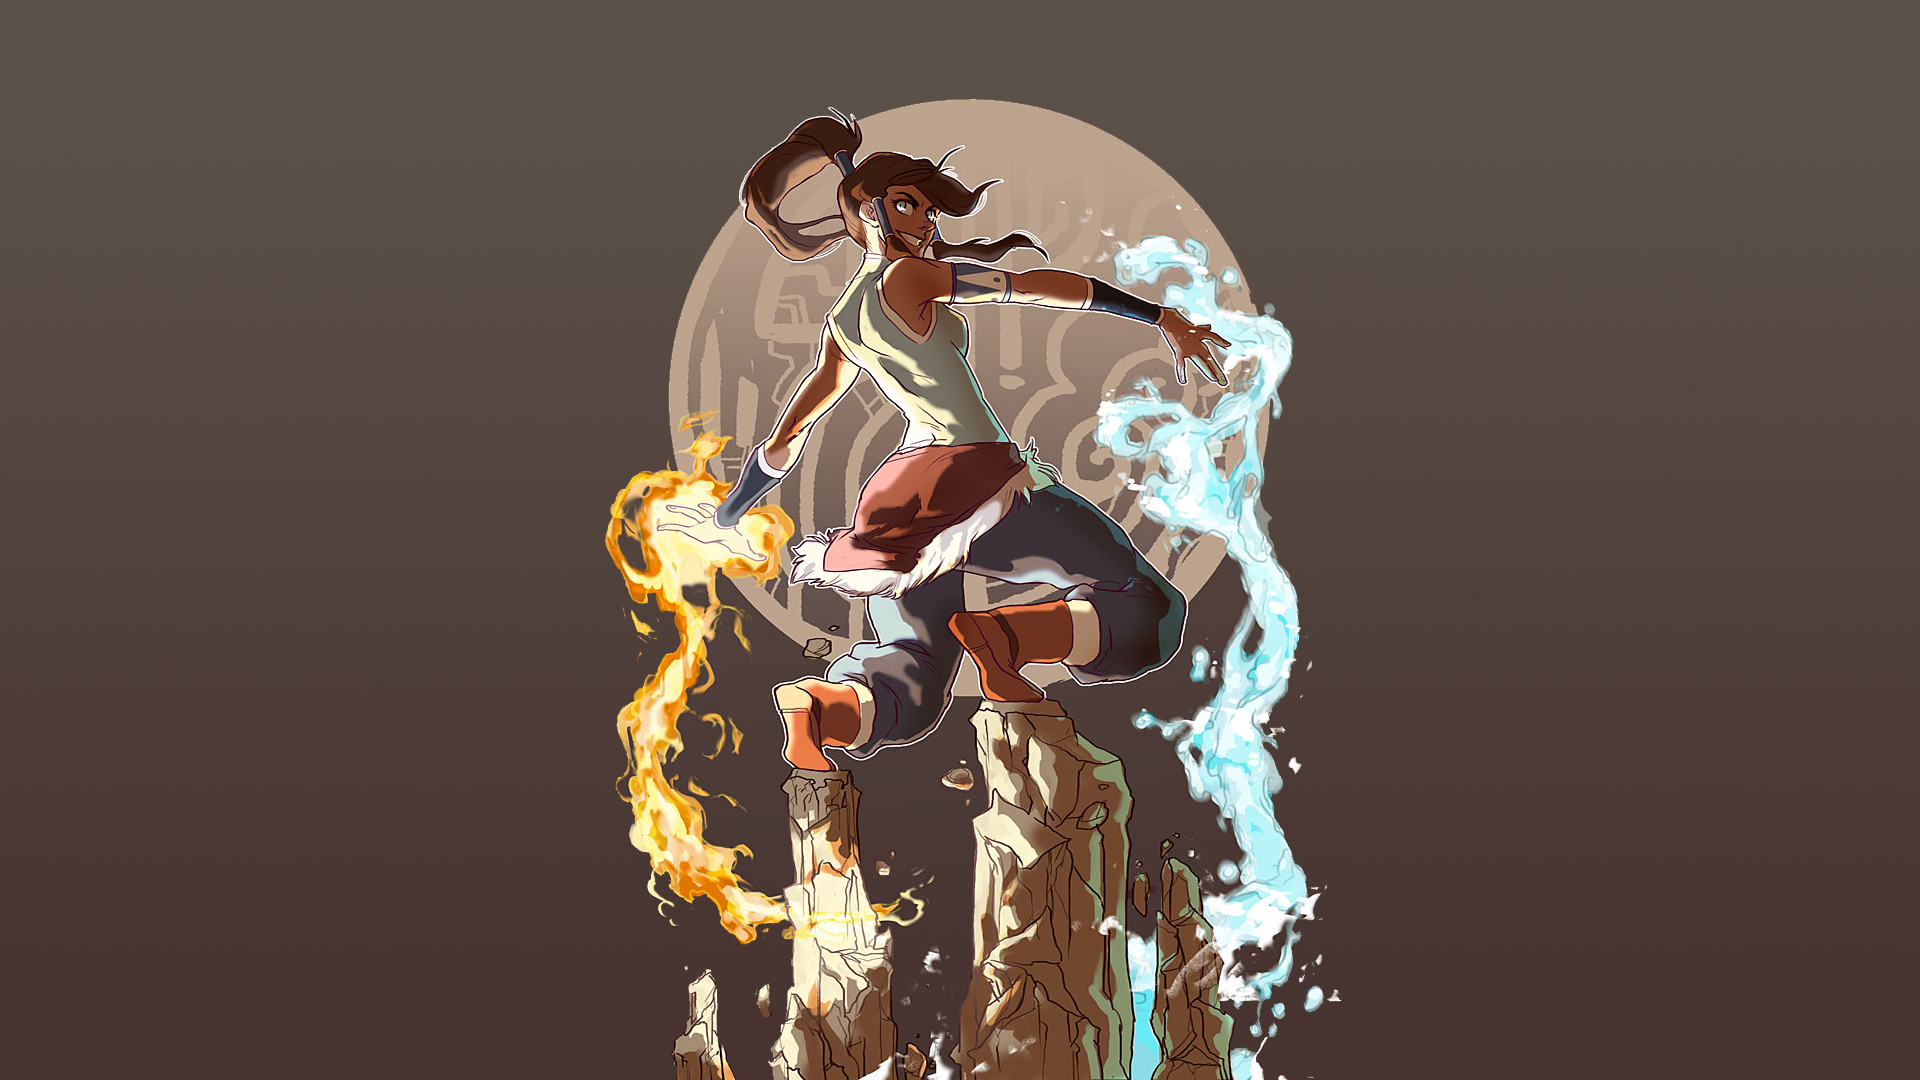 Korra (The Legend Of Korra) HD Wallpapers and Backgrounds. 